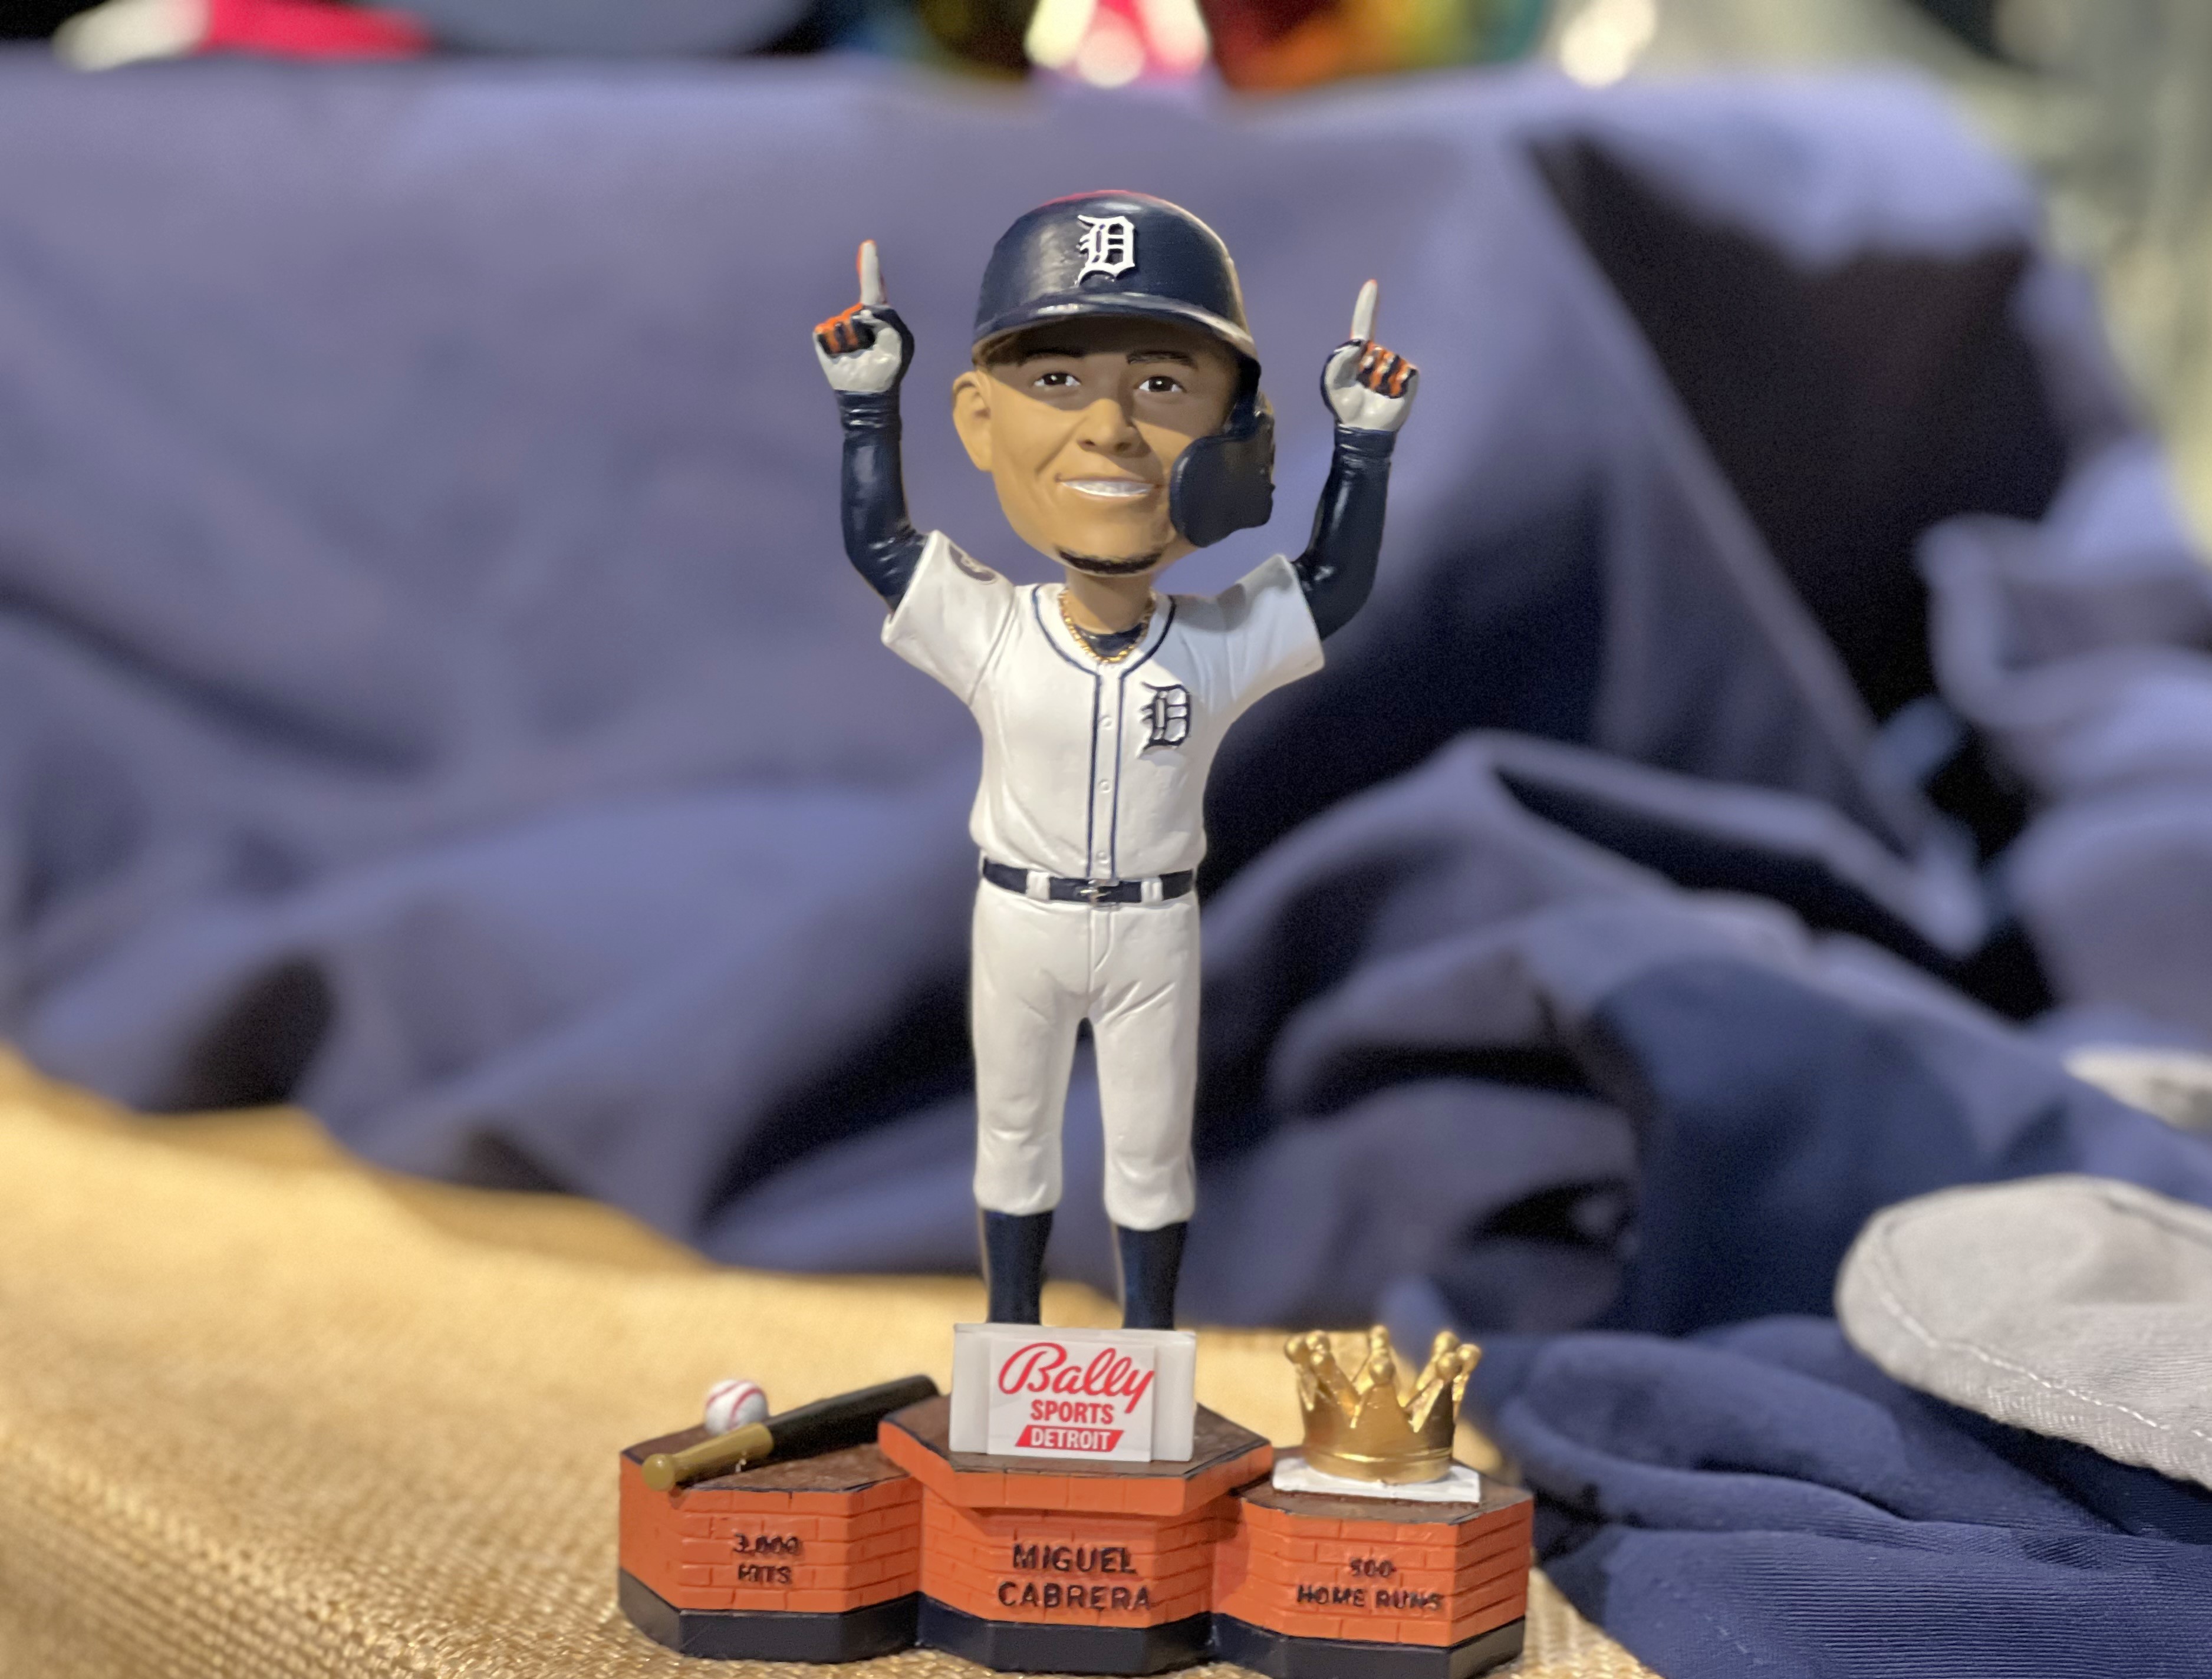 All the Detroit Tigers freebies you can get at Comerica Park this